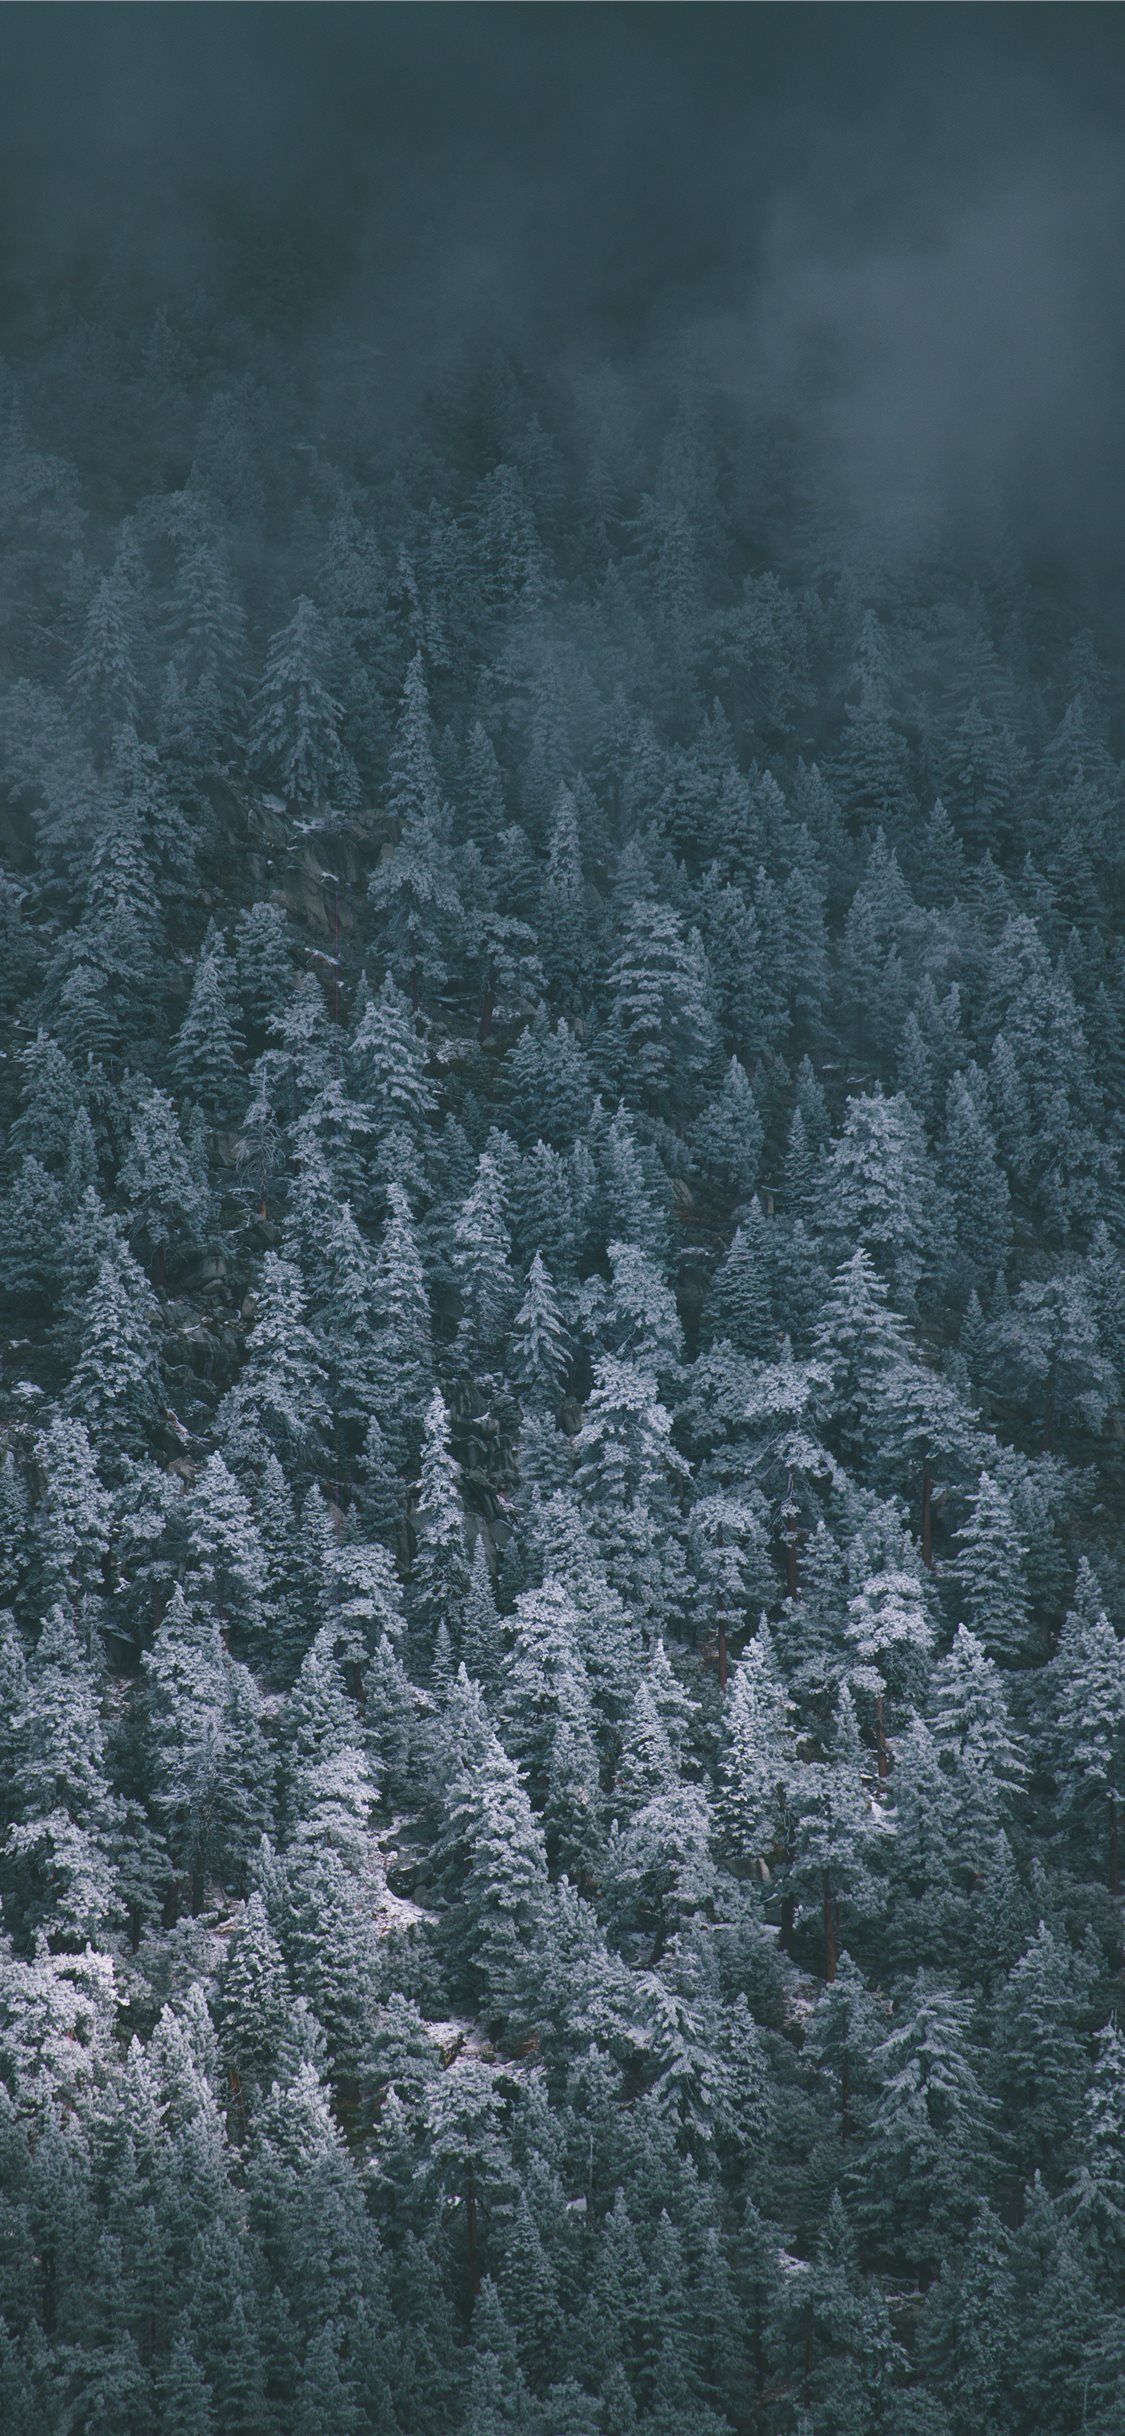 Snow Covered Pines iPhone X Wallpaper Free Download